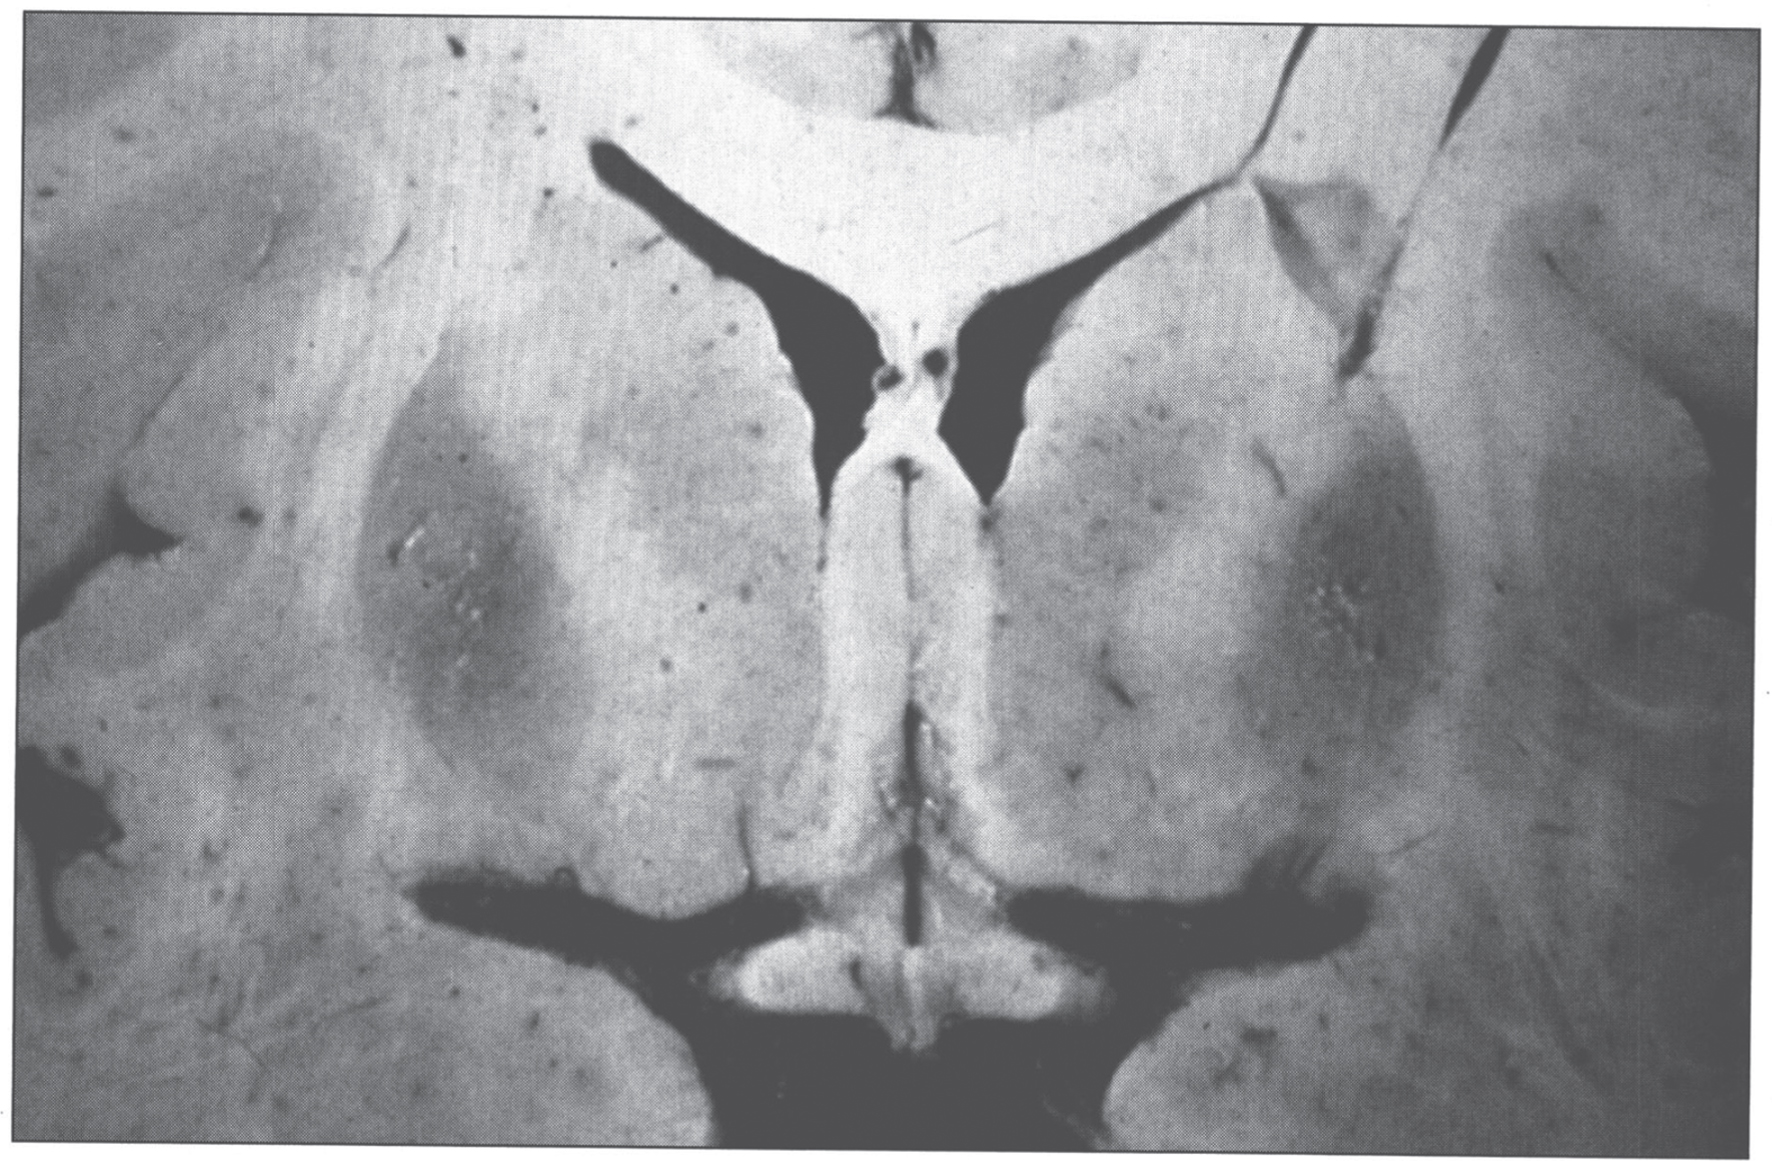 Wilson disease. Coronal section of brain showing small cystic cavitation and light brown discoloration in the basal ganglia, particularly in the putamen.